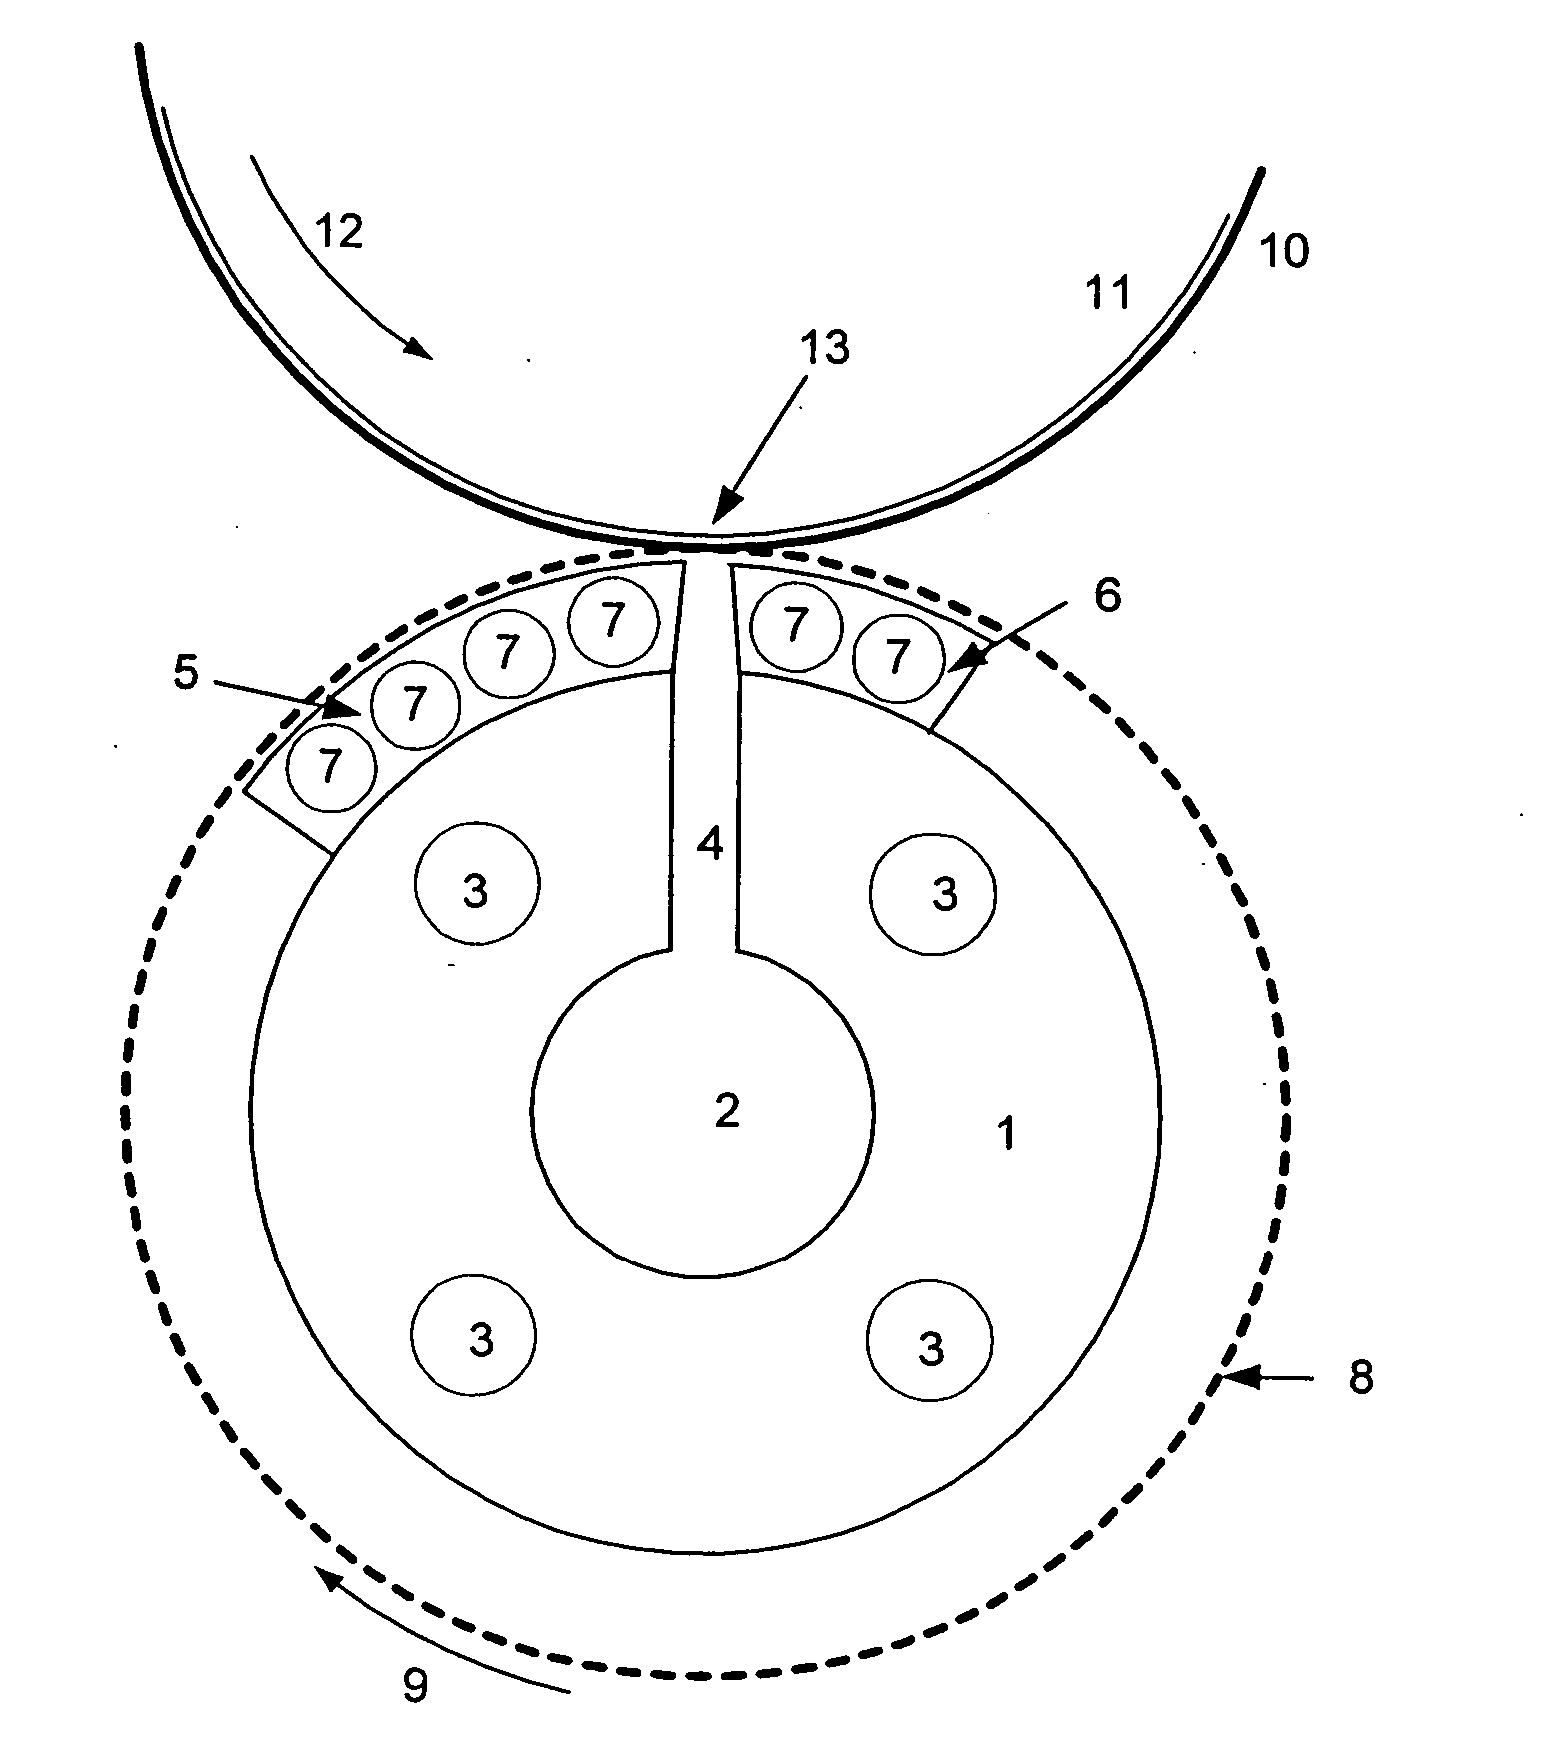 Method for applying liquid, pasty or plastic substances to a substrate